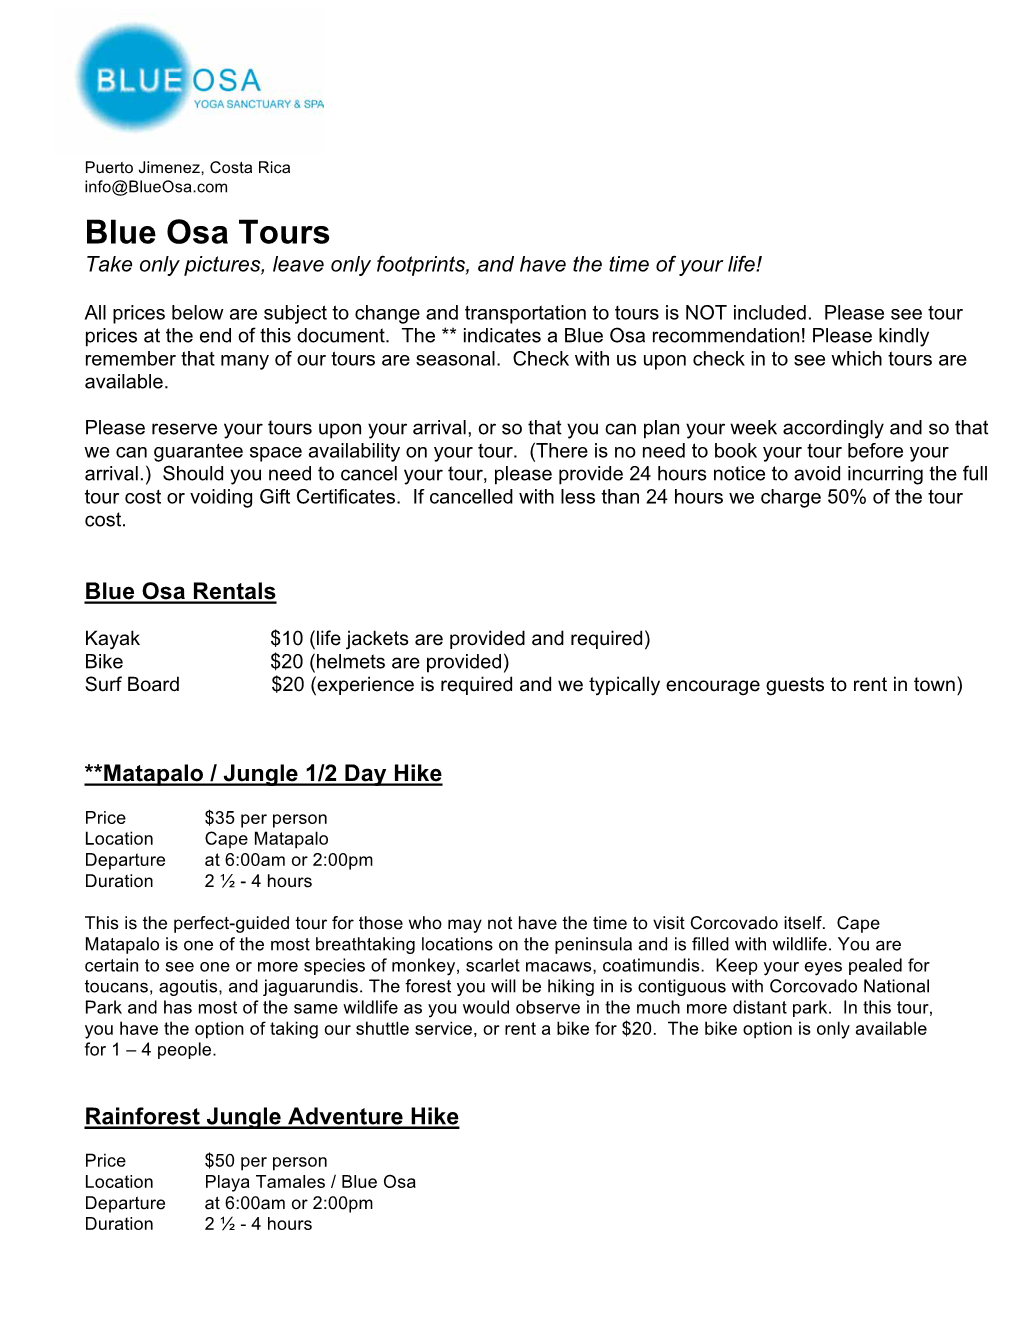 Blue Osa Tours Take Only Pictures, Leave Only Footprints, and Have the Time of Your Life!